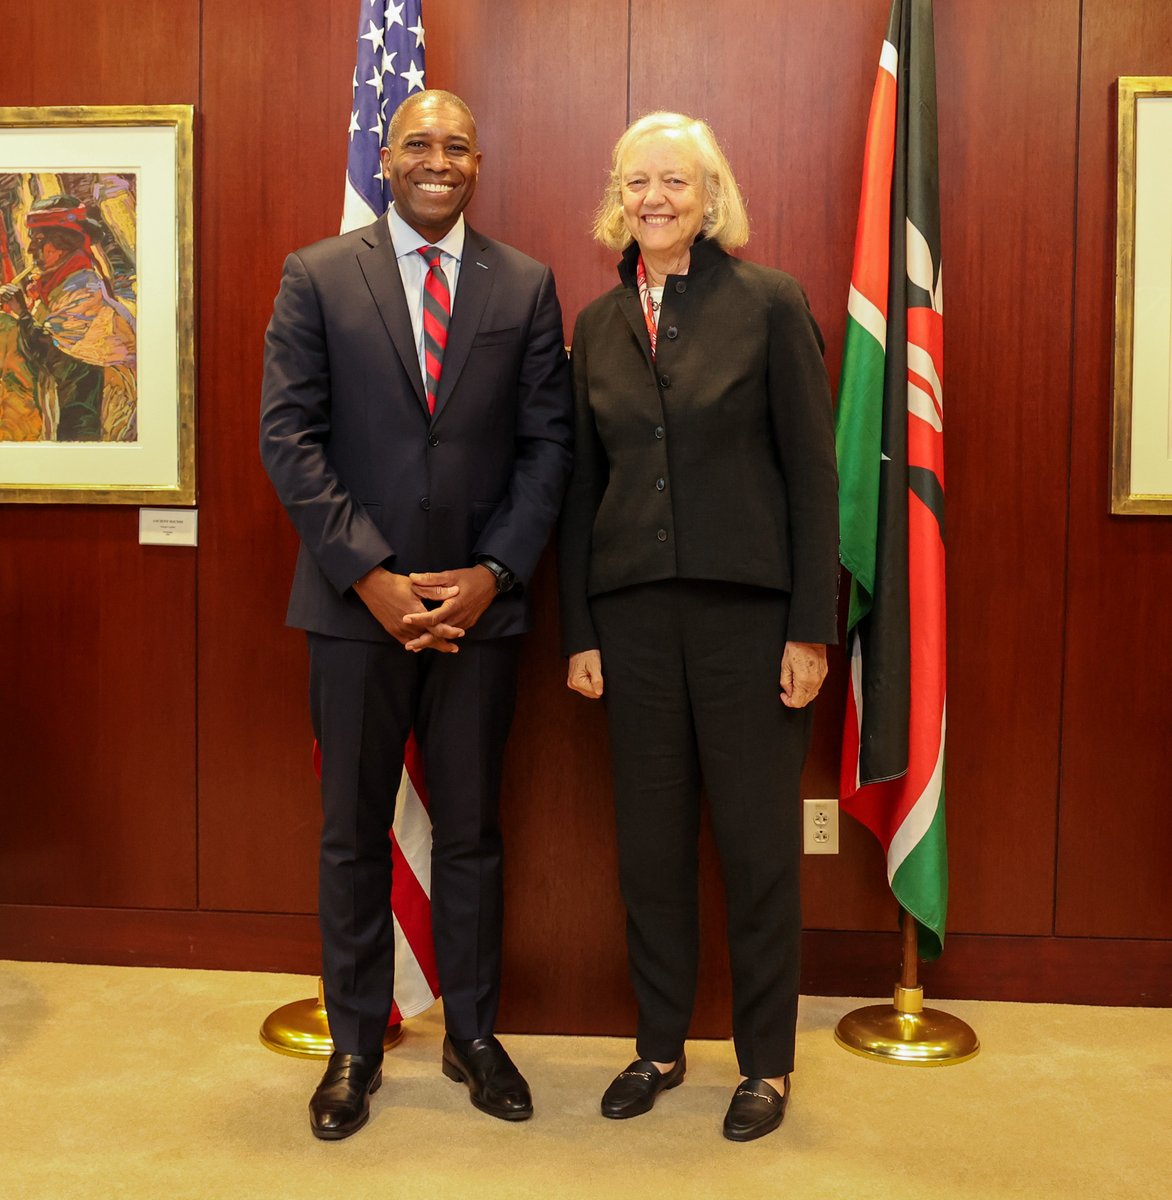 Met with @Uber Senior VP @TonyWest today to learn more about how the 🇺🇸 company's investments provide economic opportunities for thousands of Kenyans. Congrats on the launch of the new electric boda service! #Innovation